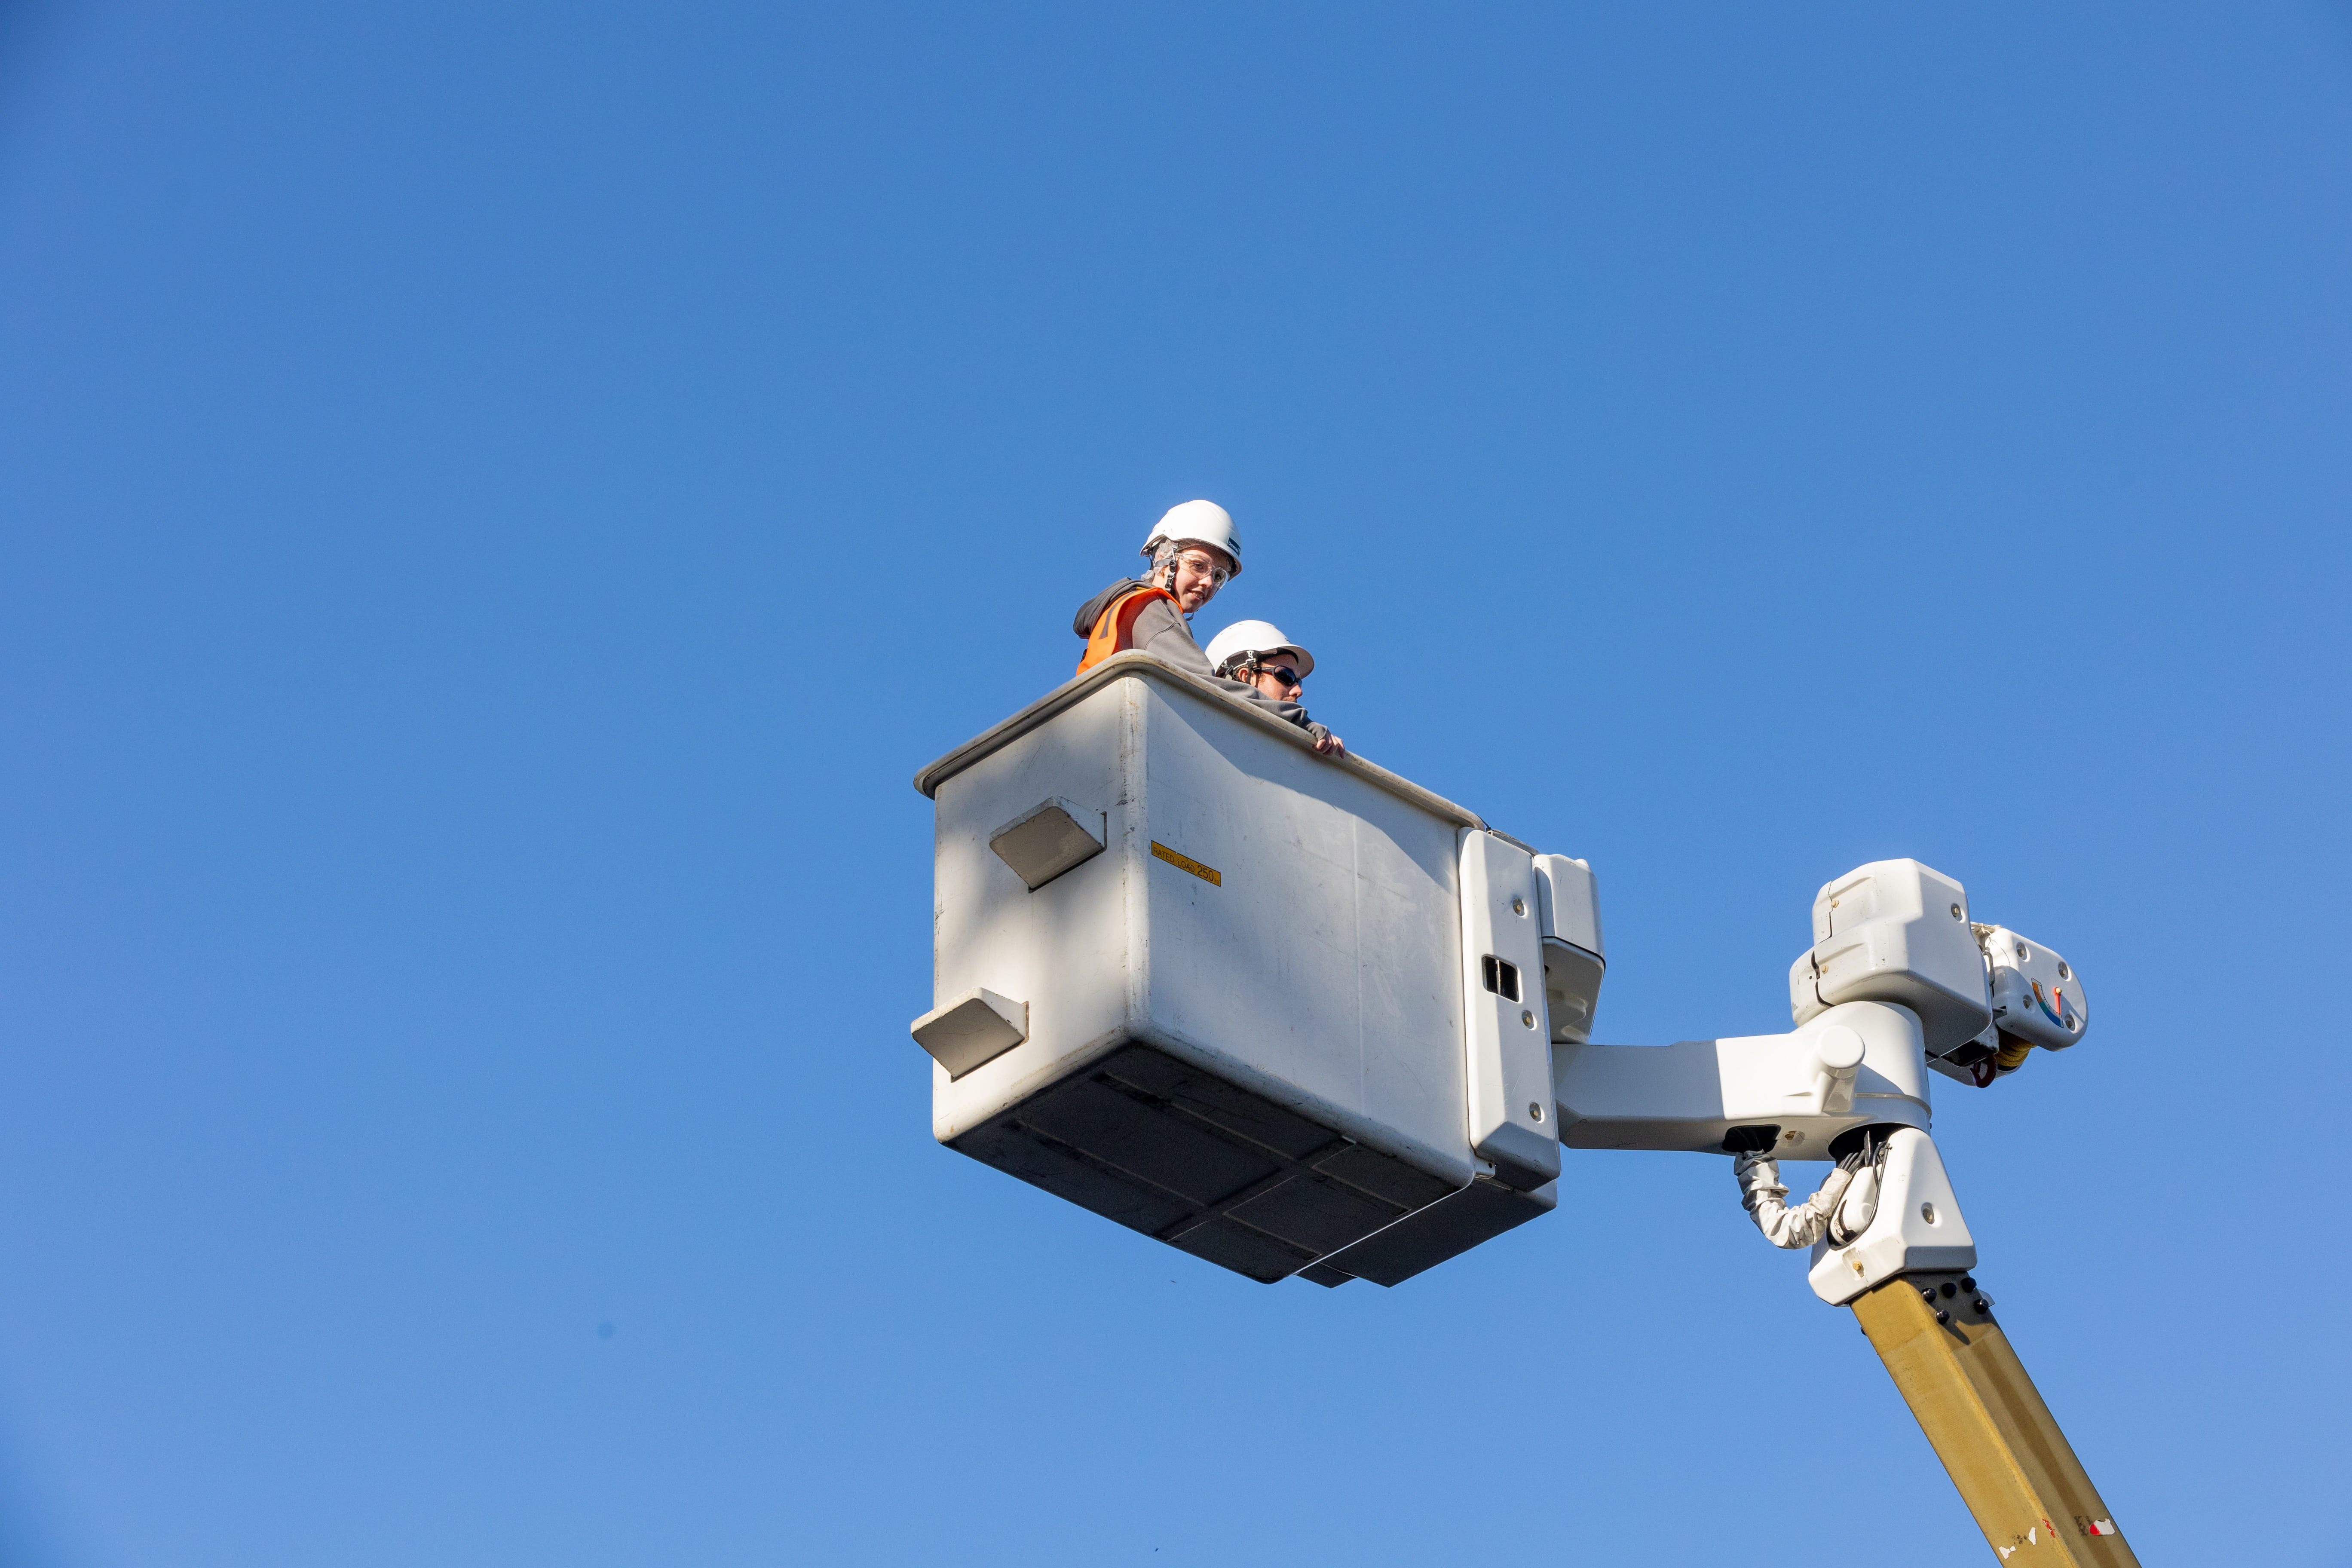 Electricity faultman and female student up high in the bucket of a truck with blue sky as the background